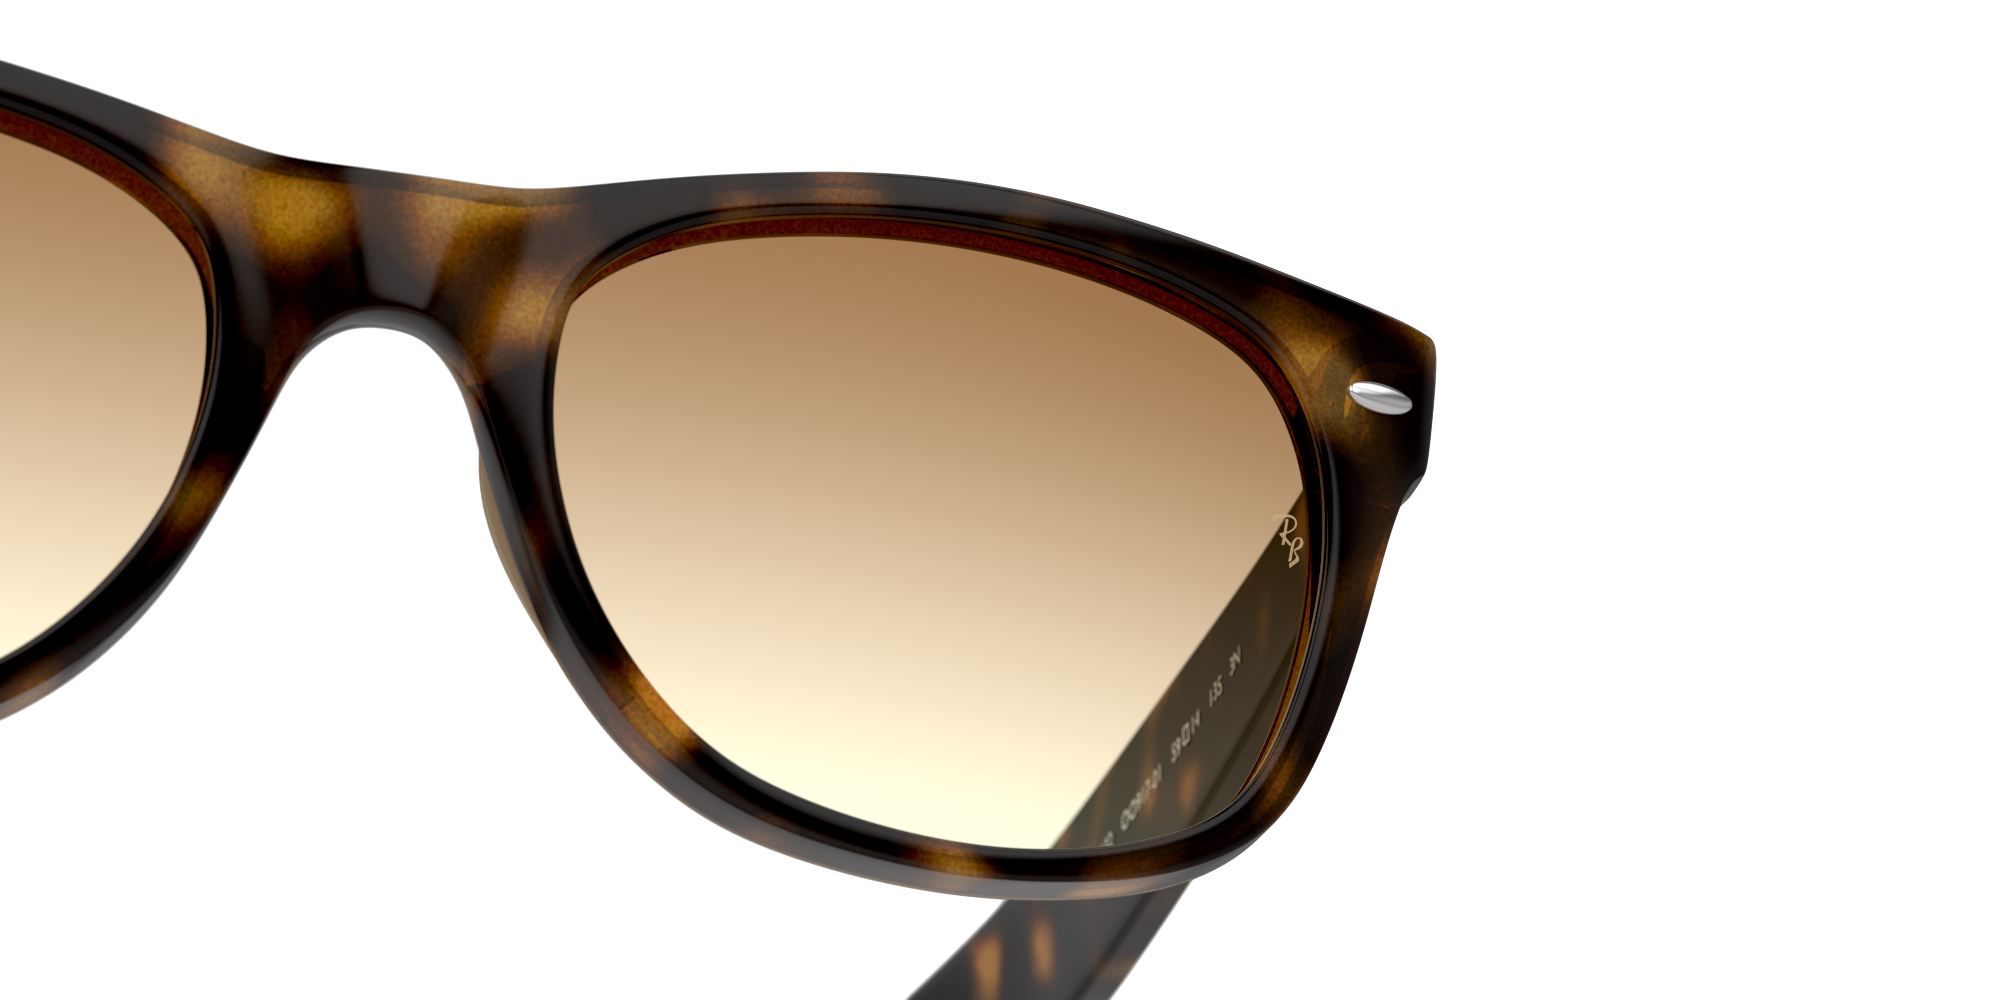 [products.image.detail01] Ray-Ban New Wayfarer Classic RB2132 710/51